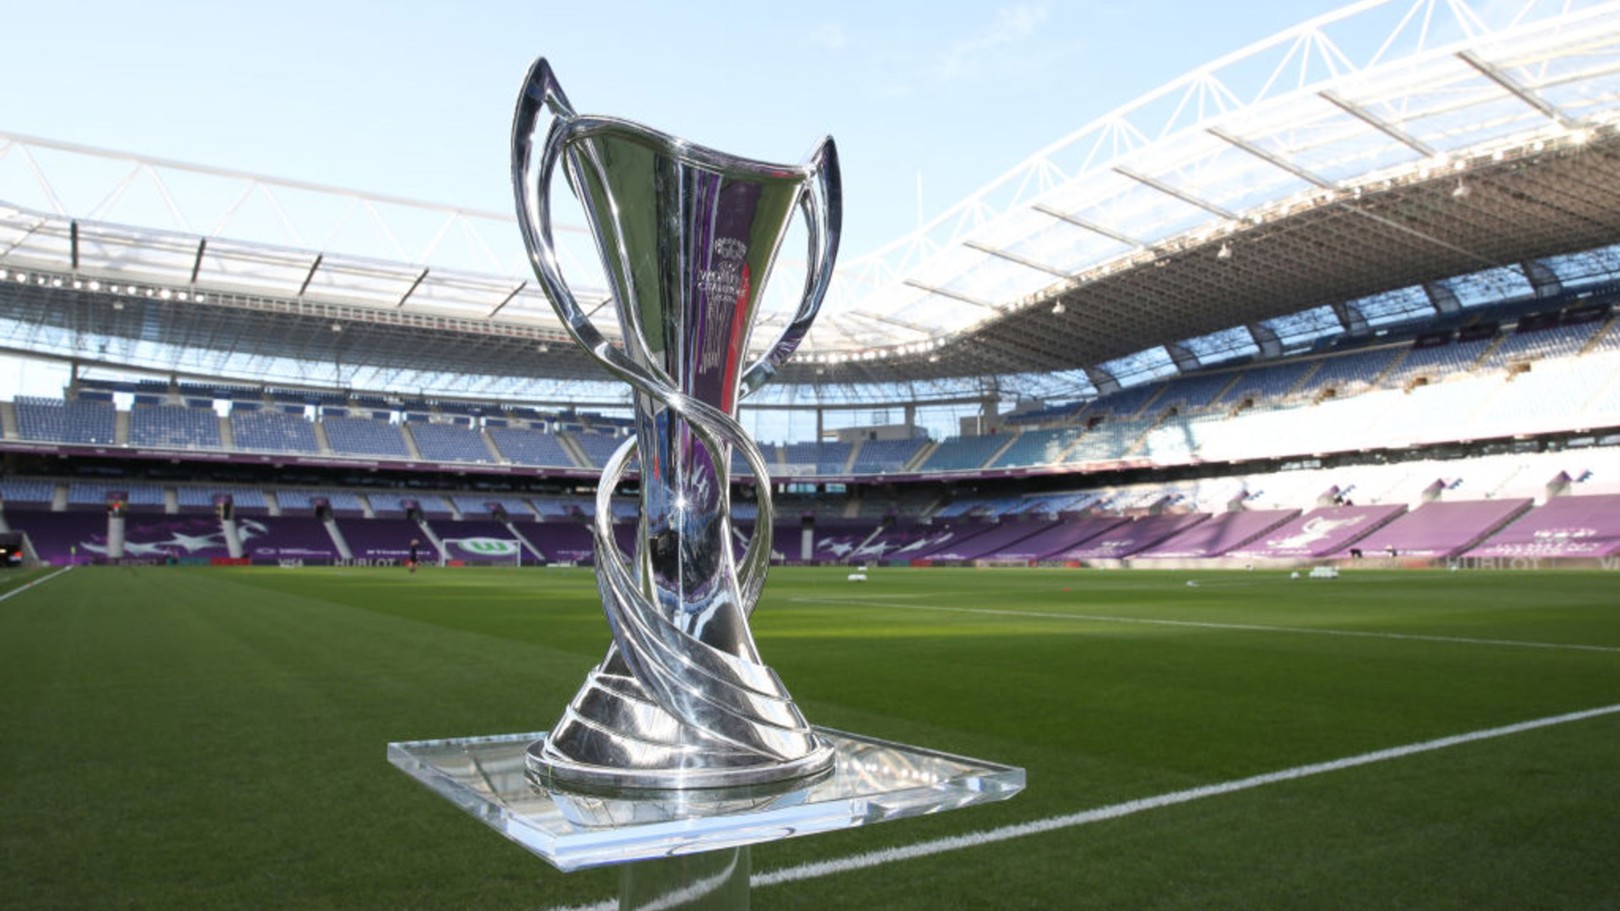 Dates confirmed for UEFA Women's Champions League clash with Real Madrid